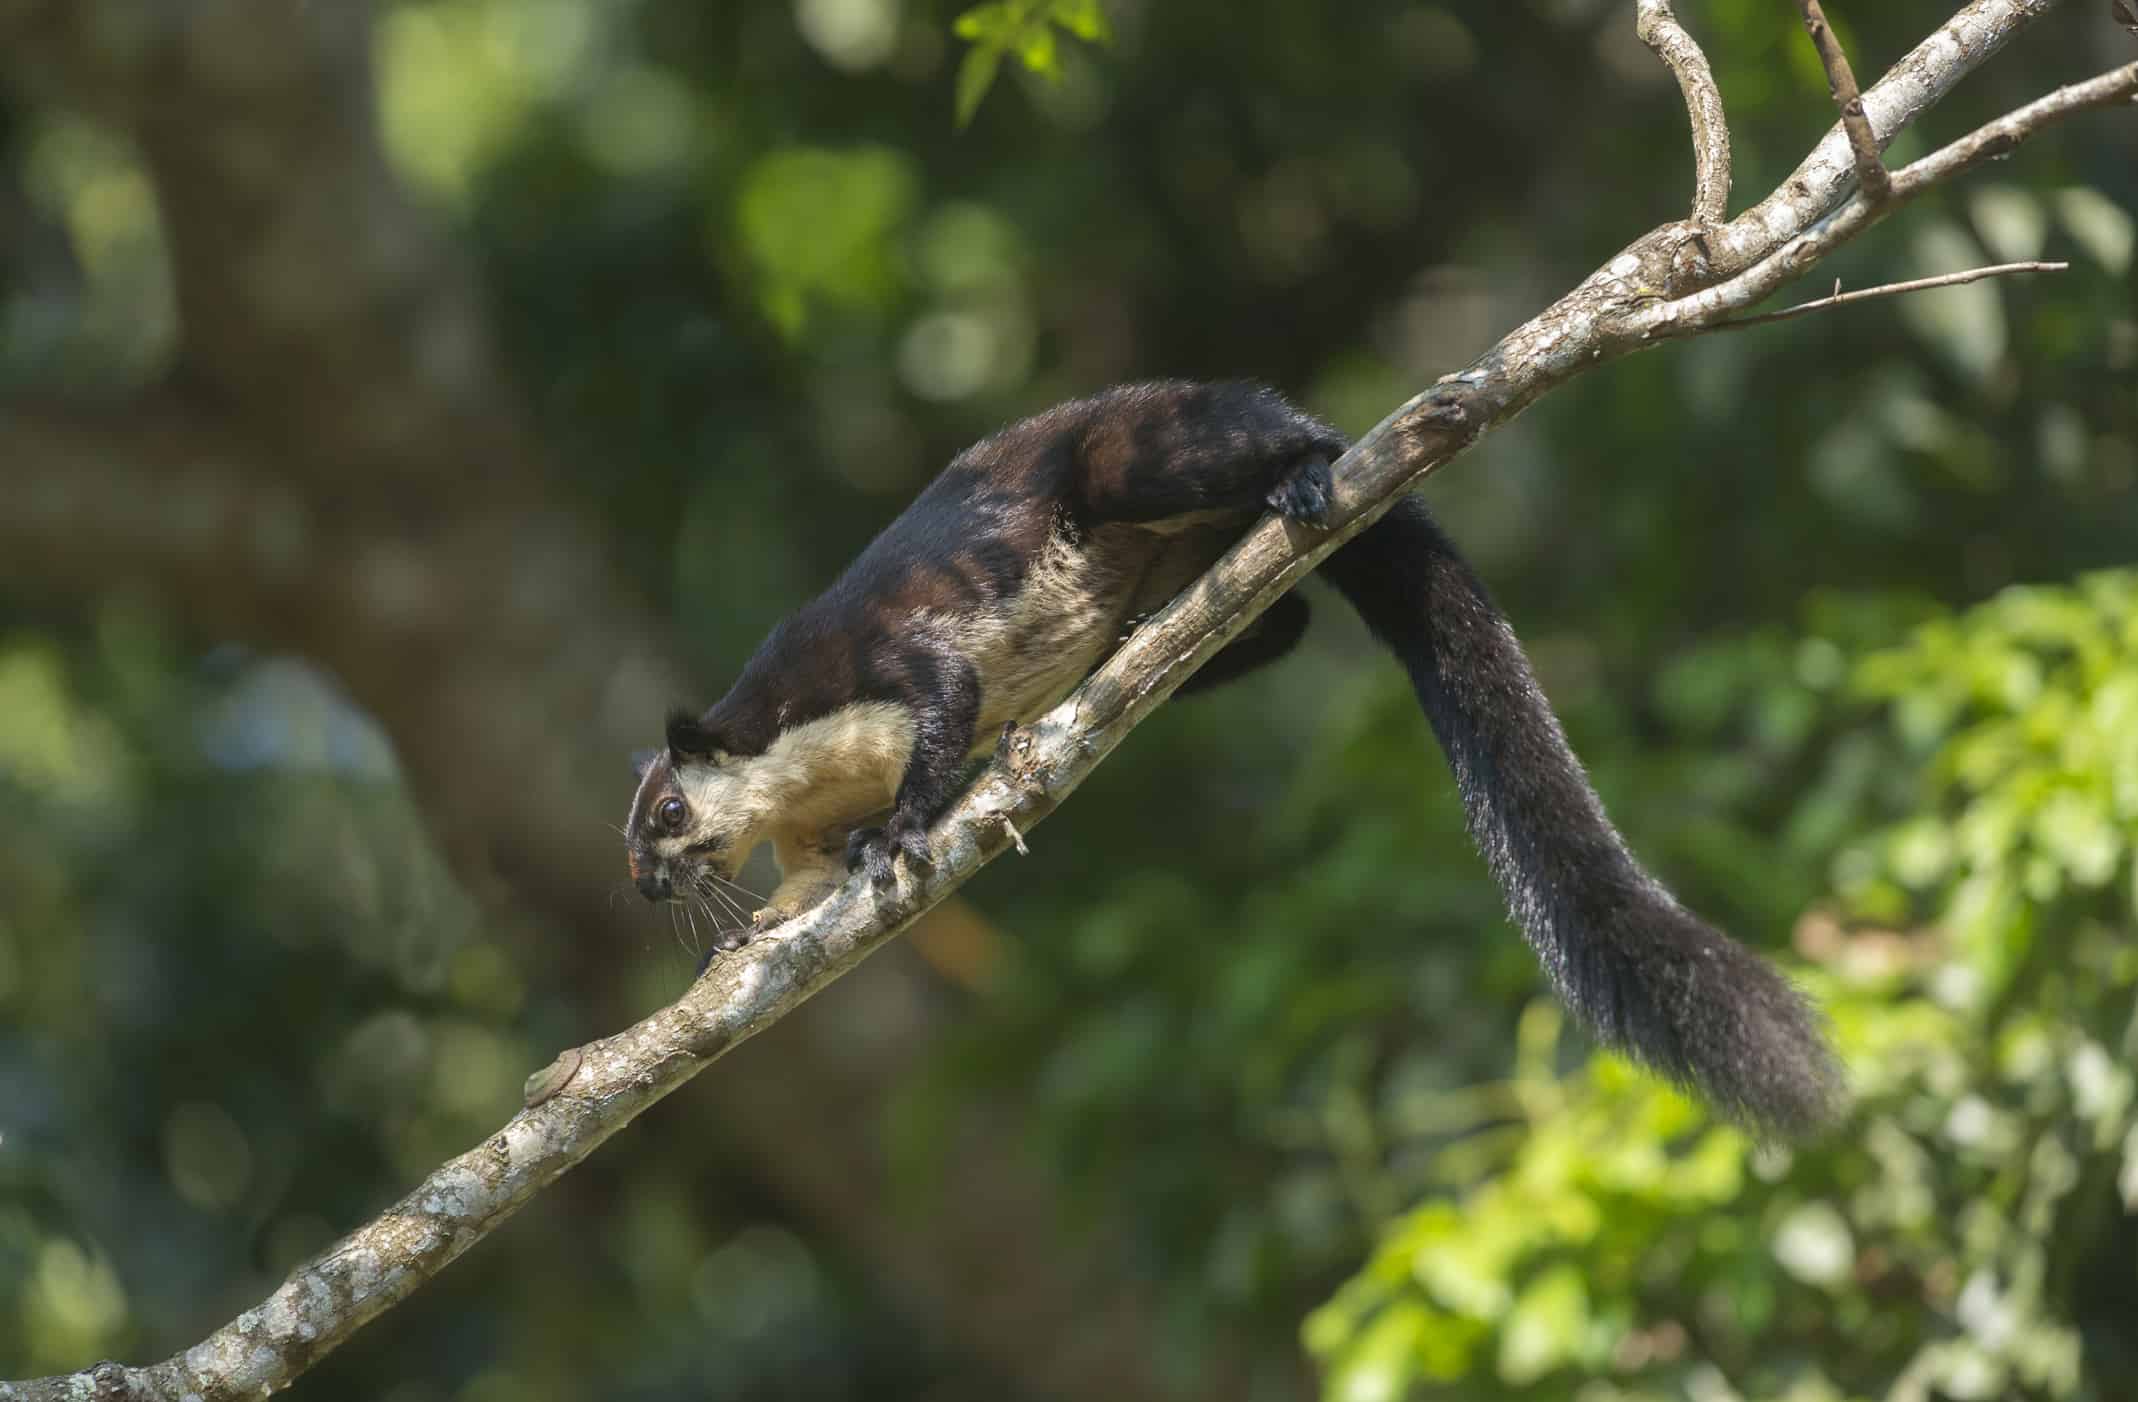 The black giant squirrel or Malayan giant squirrel, Ratufa bicolor, Assam, India